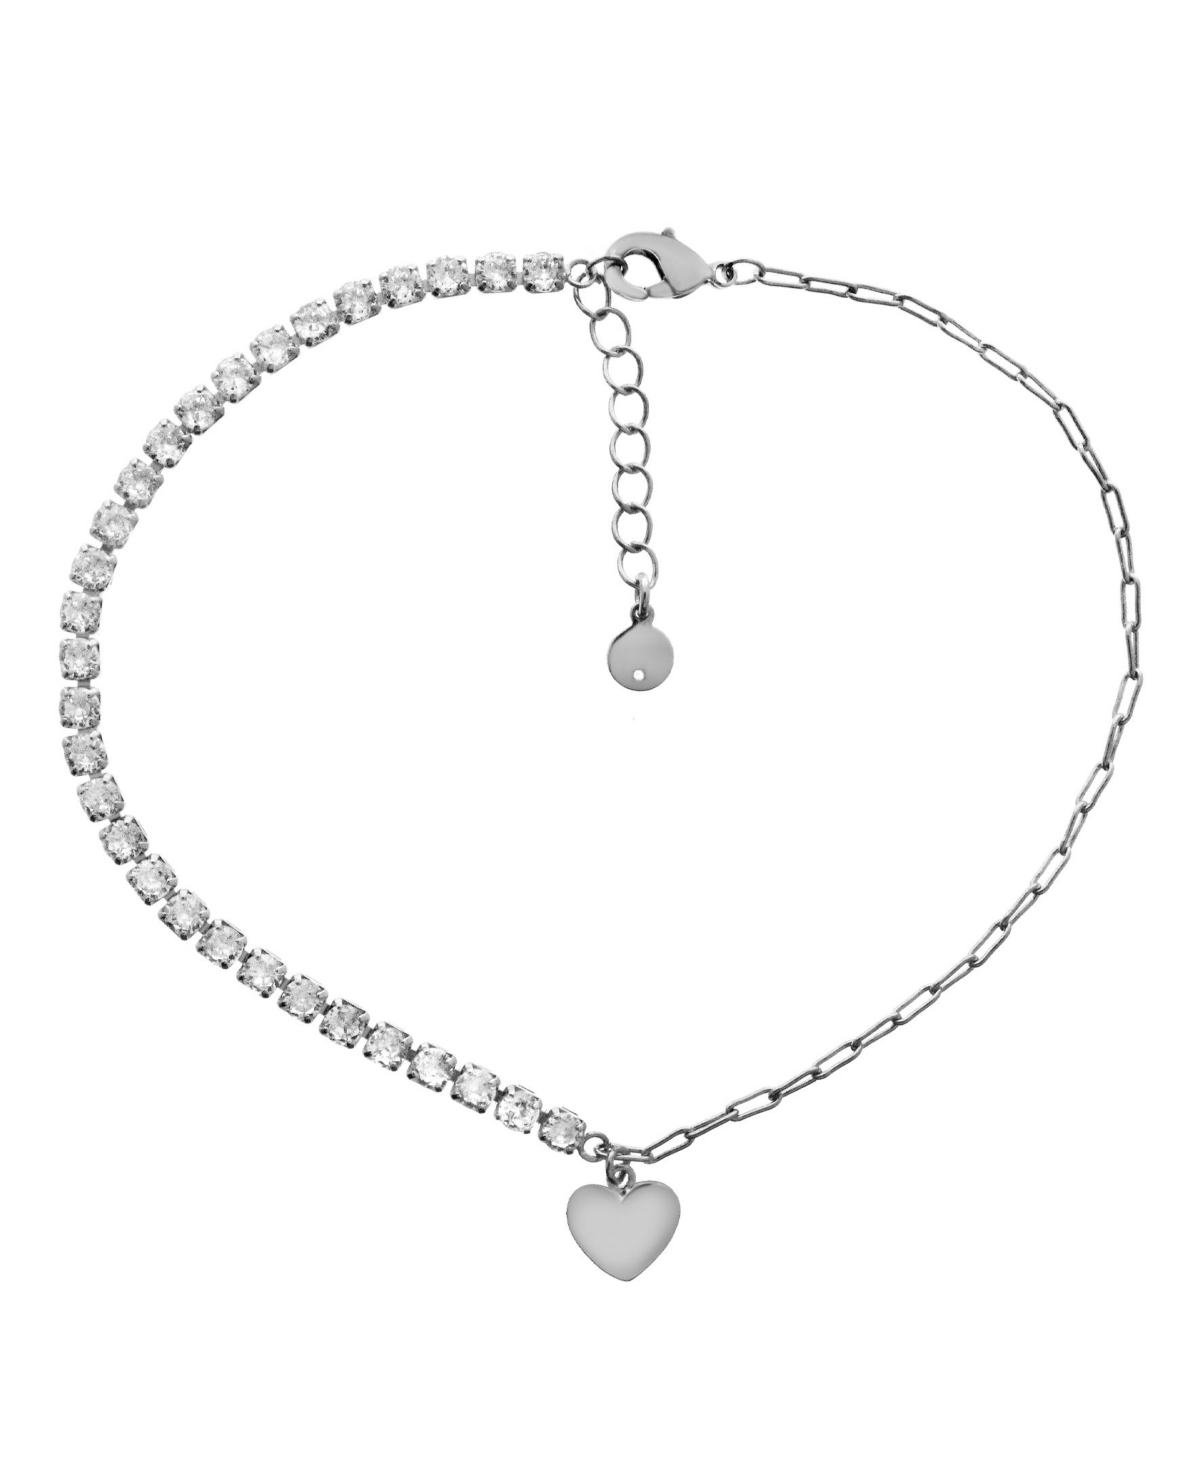 Chain Heart Charm Anklet in Silver Plate - Silver